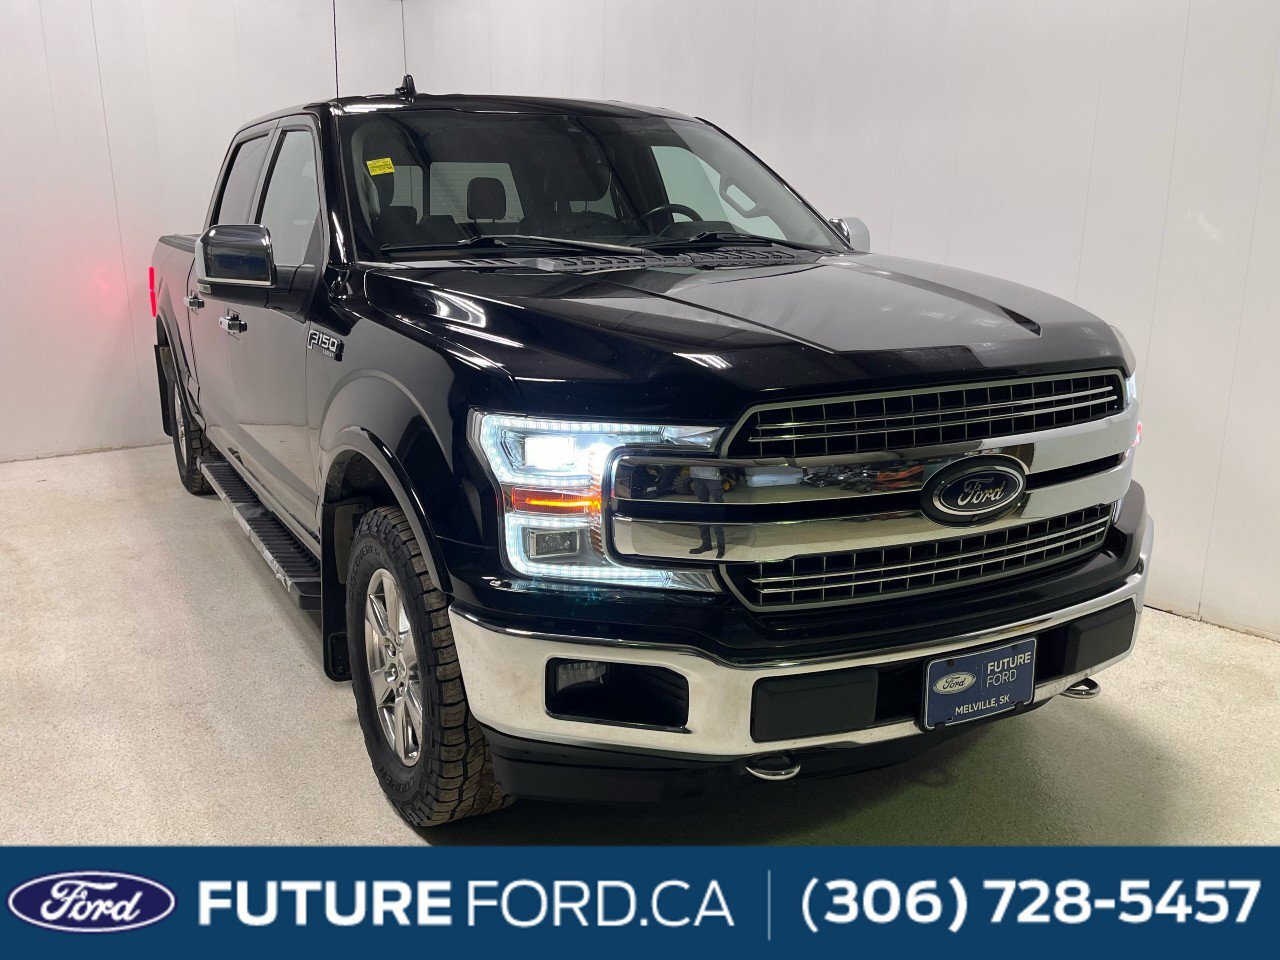 2018 Ford F-150 LARIAT | REMOTE VEHICLE START | REAR VIEW CAMERA |